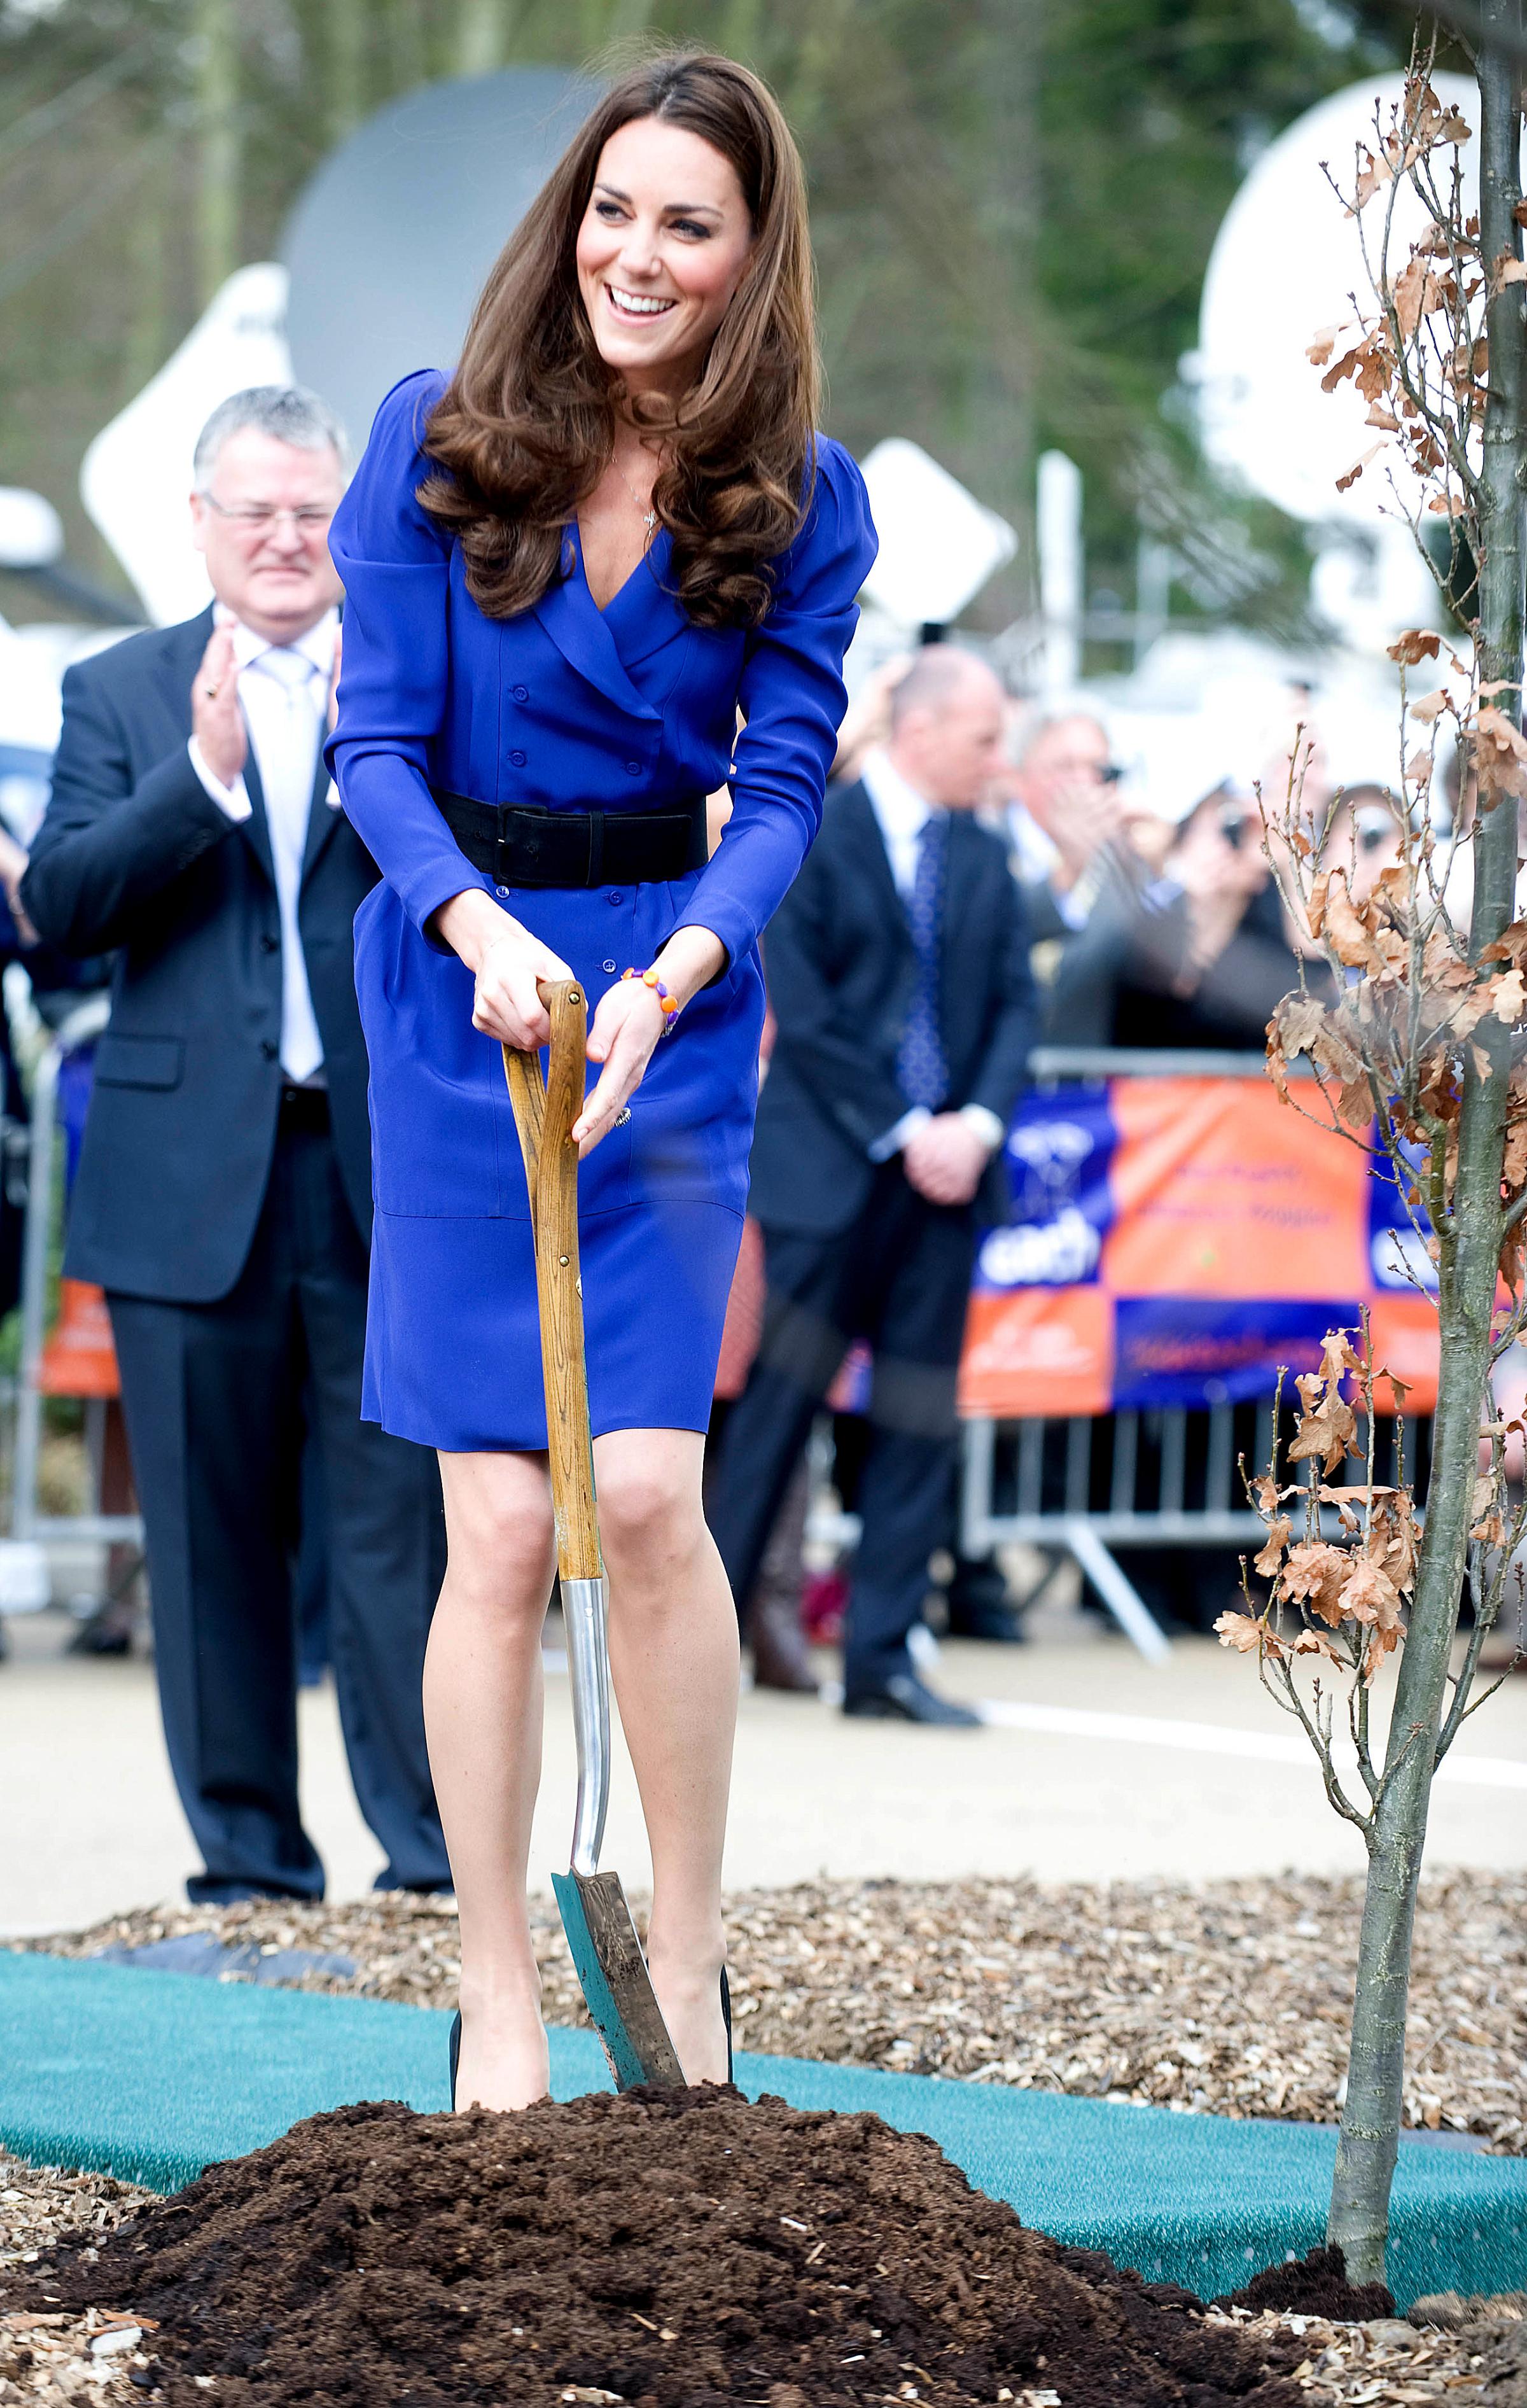 Britain's Catherine, Duchess of Cambridge plants a tree during a visit to The Treehouse in Ipswich, England, on March 19, 2012.